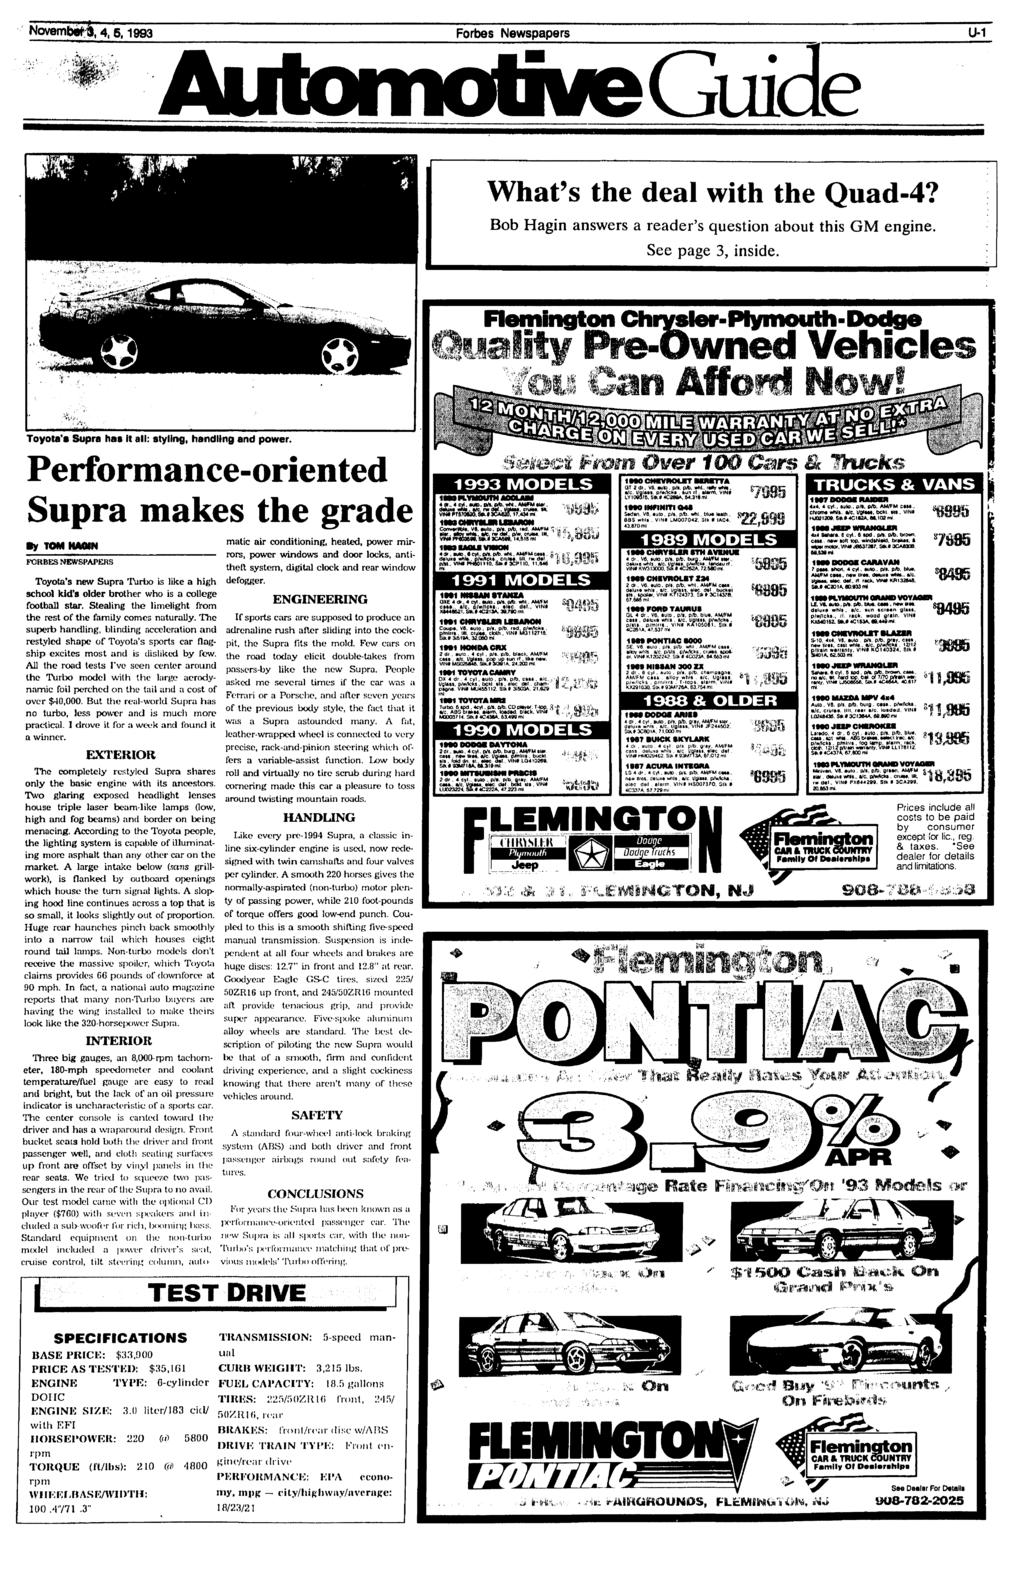 Novembef^, 4,5,1993 Forbes Newspapers U-1 Automotive Guide What's the deal with the Quad-4? Bob Hagin answers a reader's question about this GM engine. See page 3, inside.